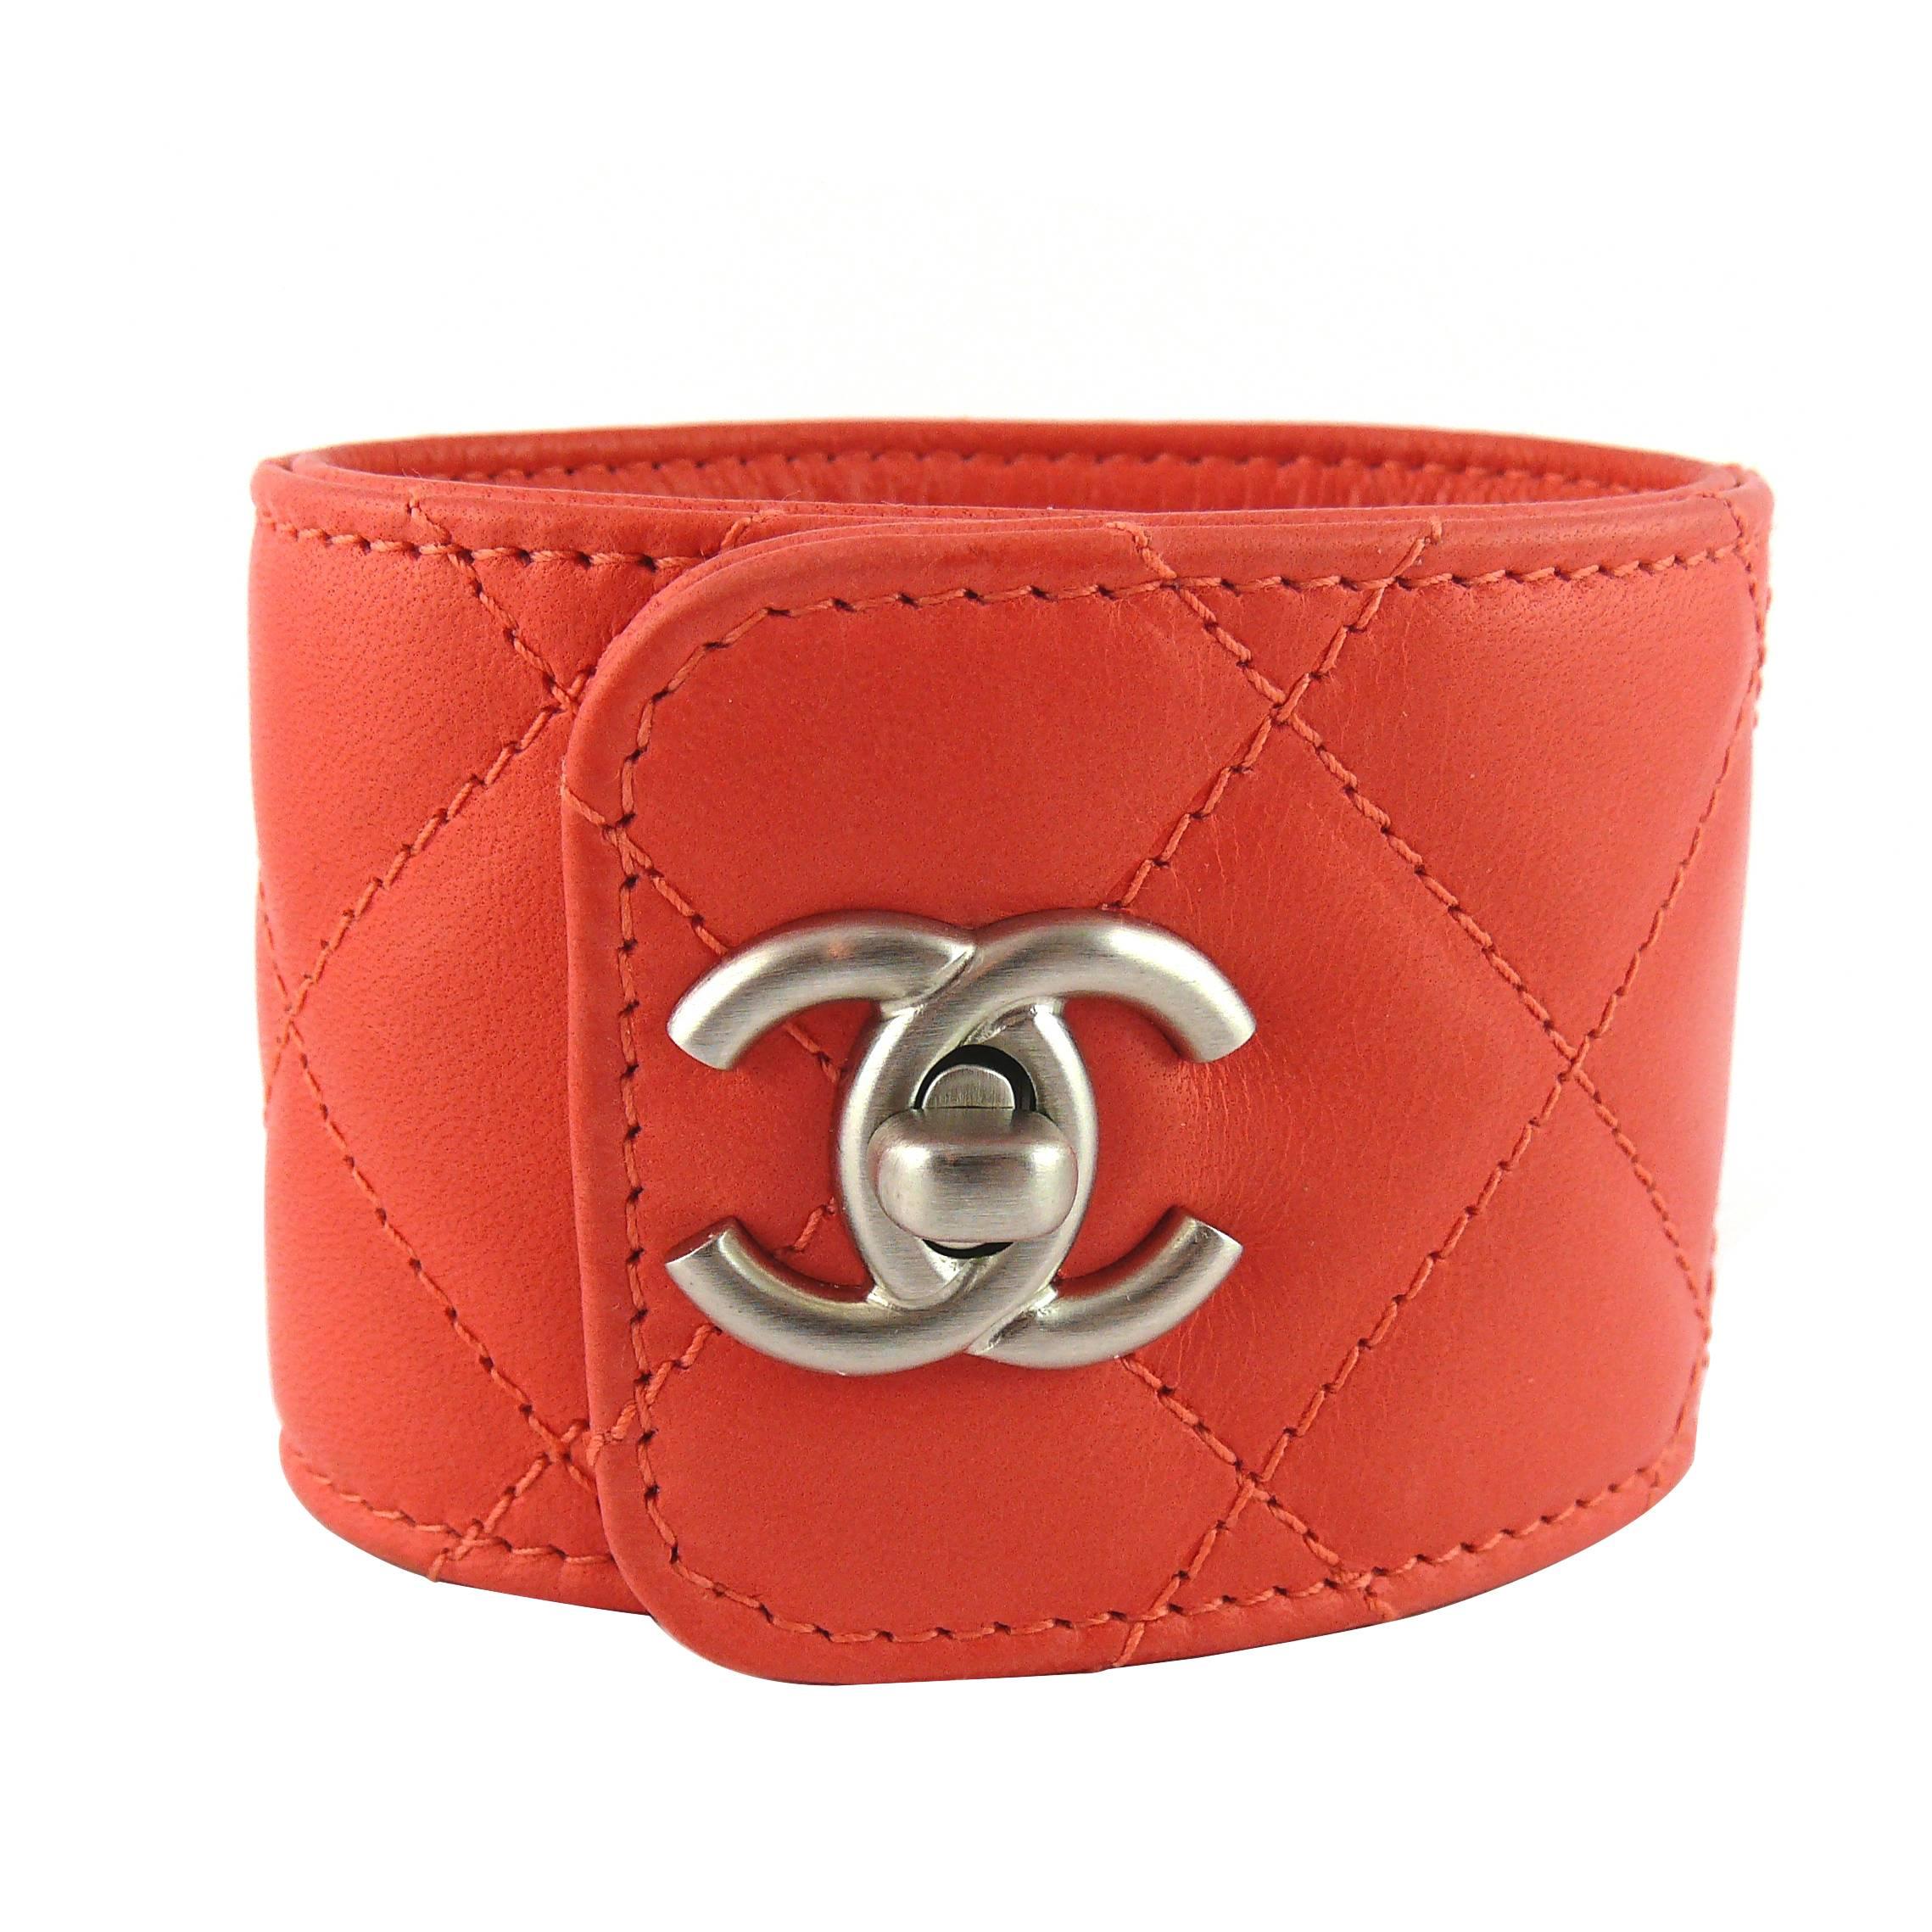 Chanel Quilted Coral Leather CC Turnlock Cuff Bracelet For Sale